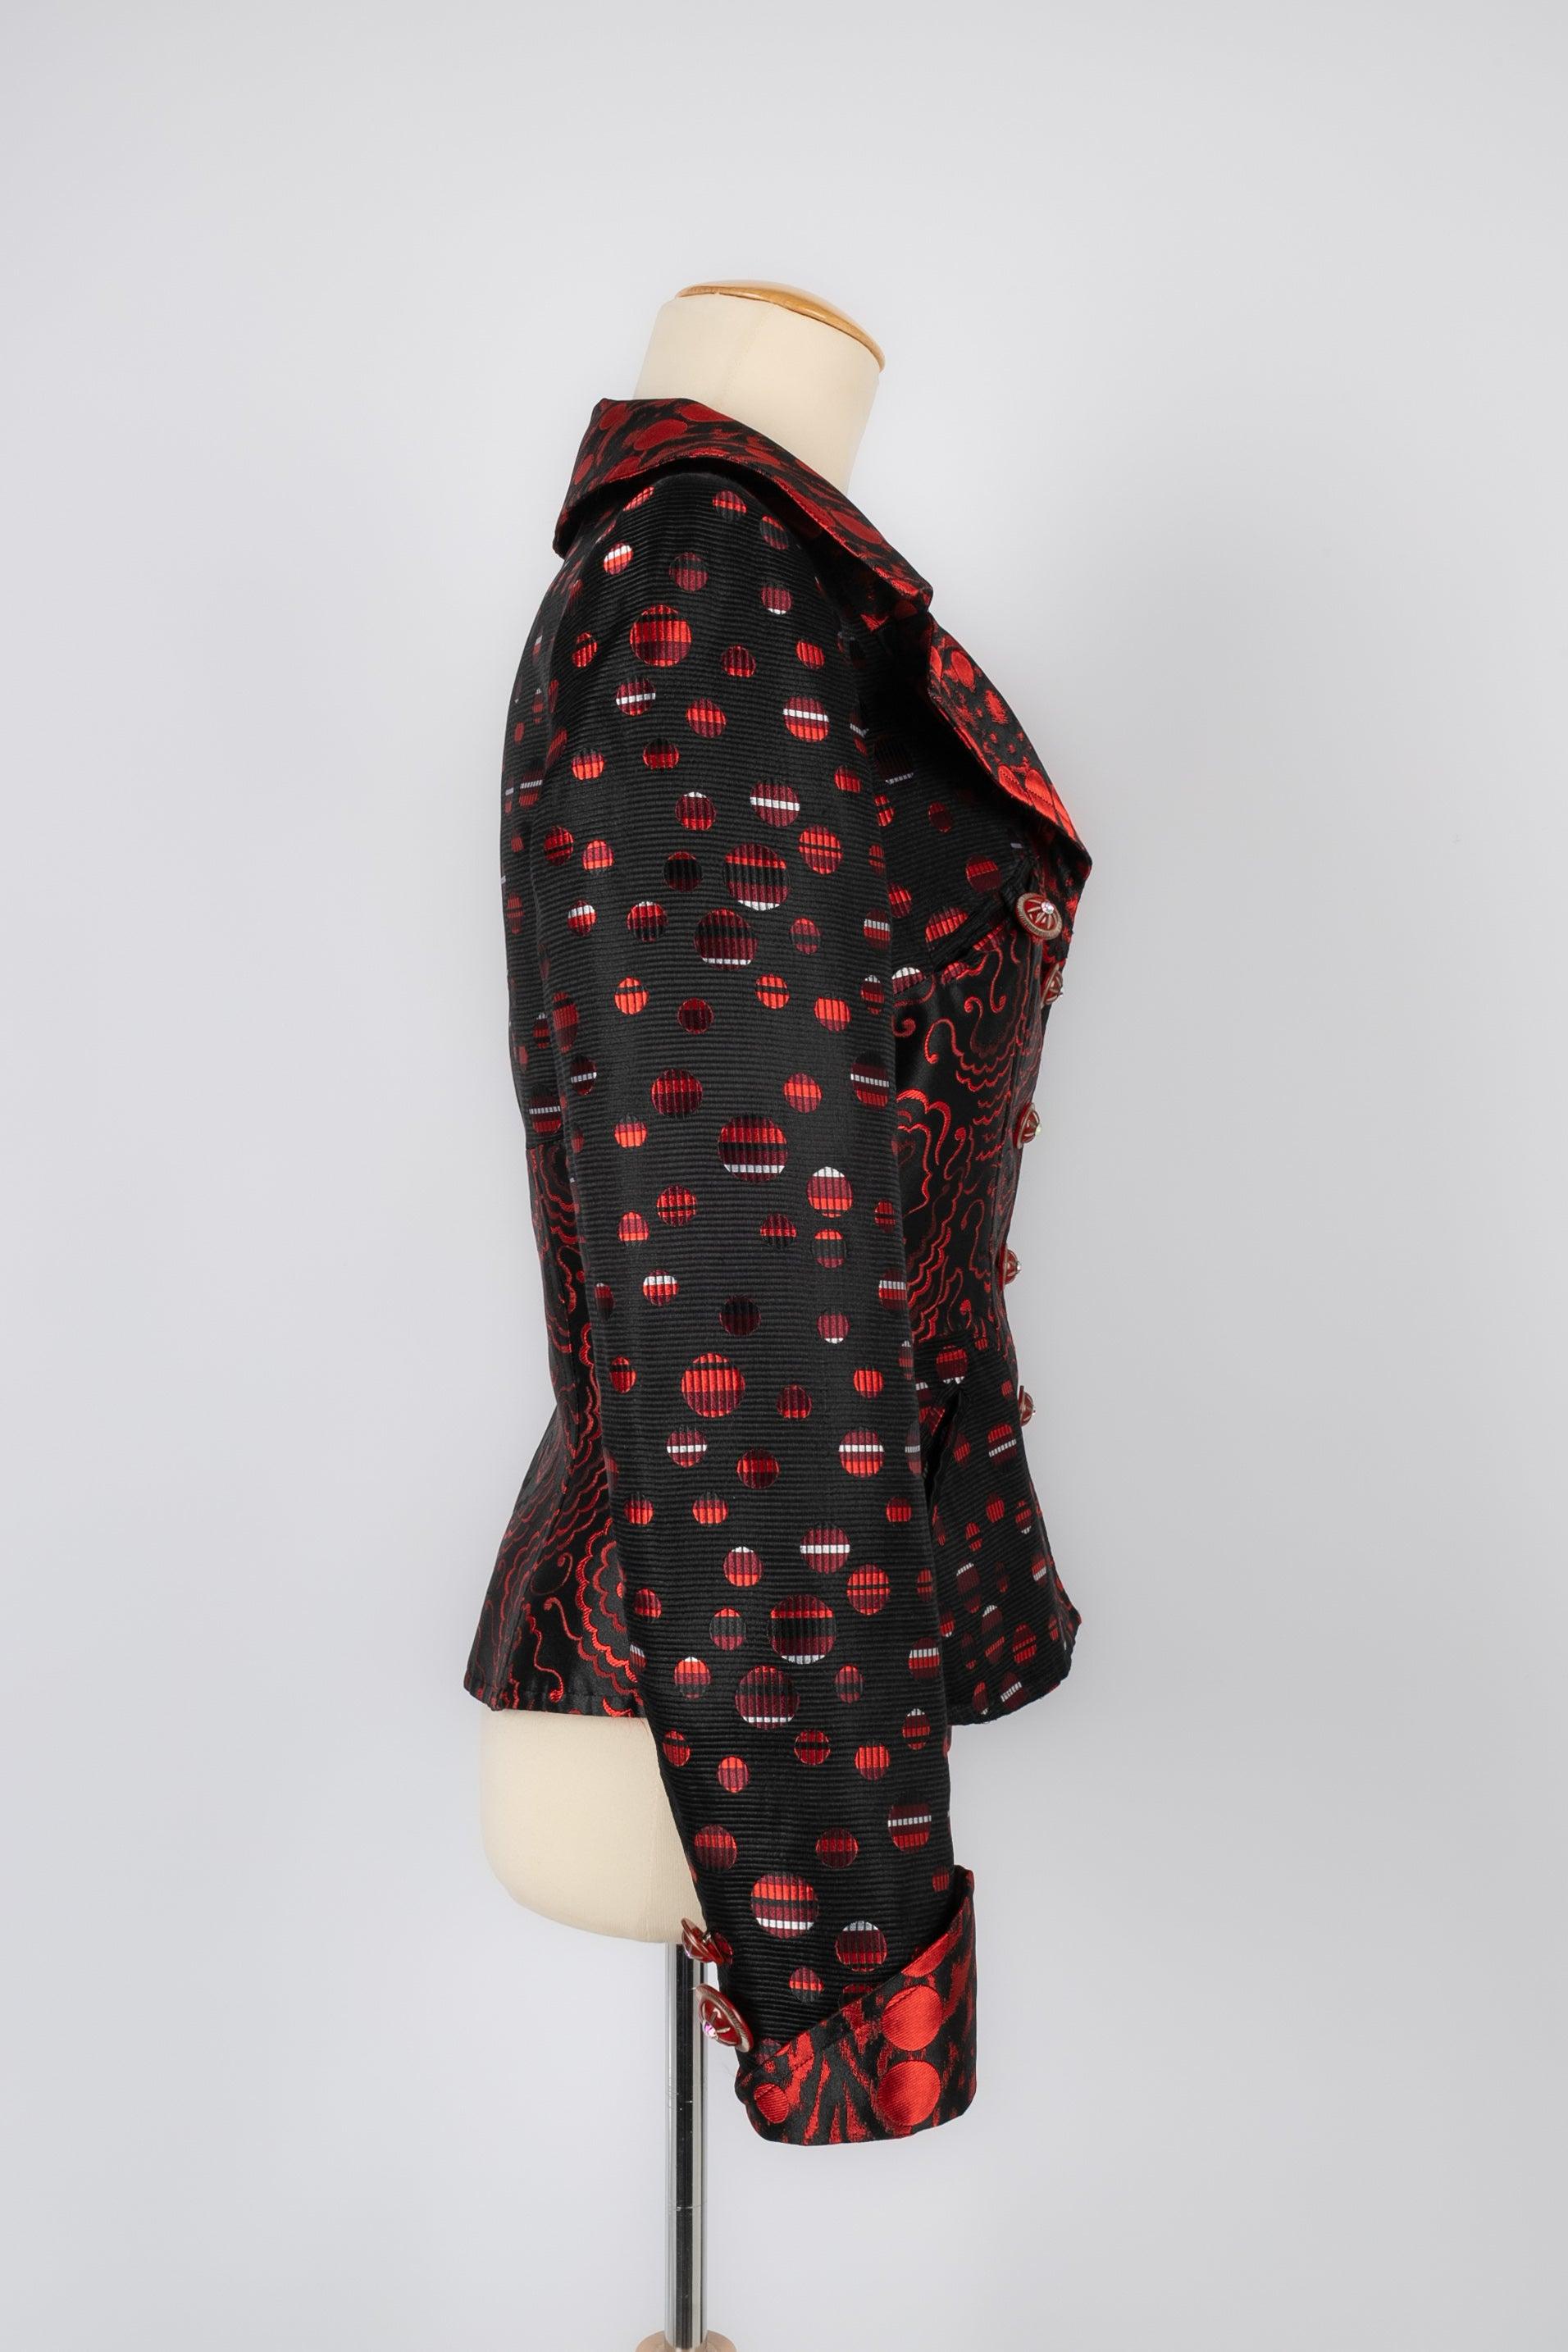 Women's Christian Lacroix Silk Jacket in Black and Red Tones For Sale